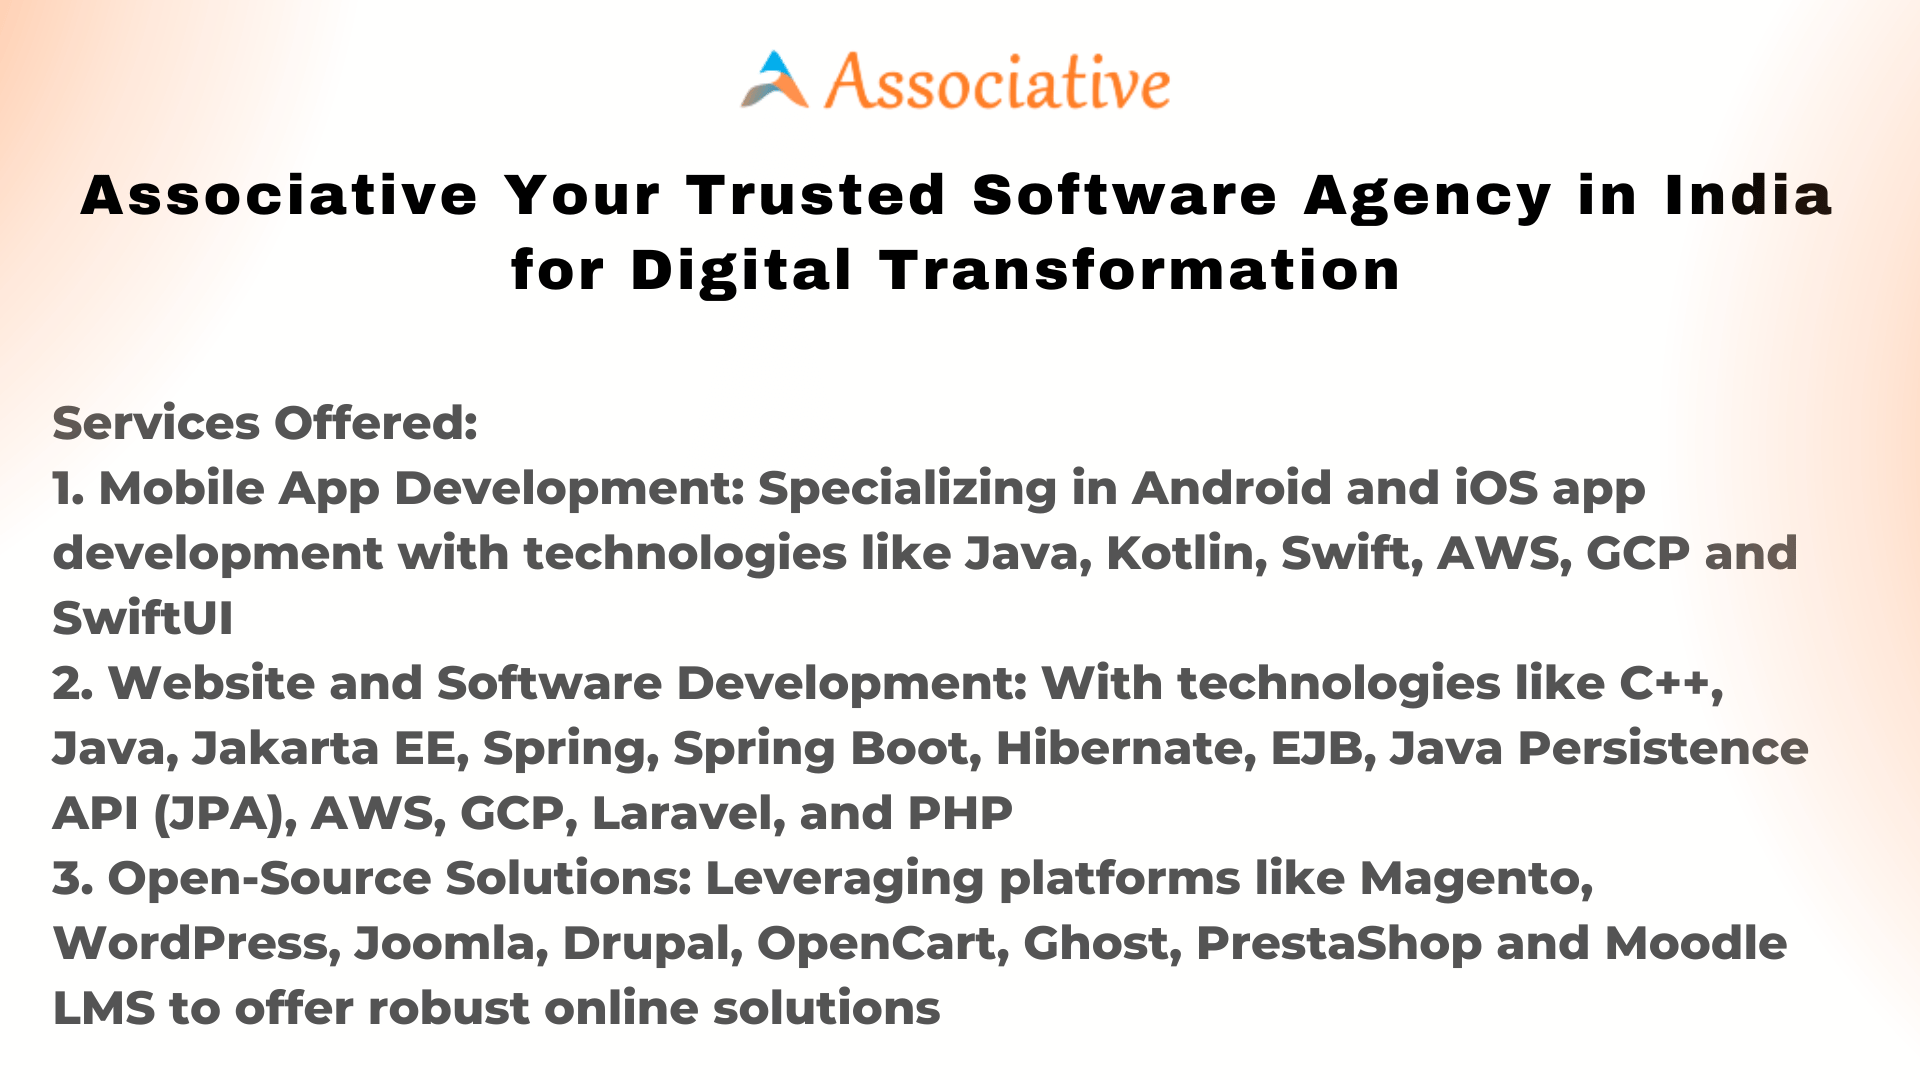 Associative Your Trusted Software Agency in India for Digital Transformation